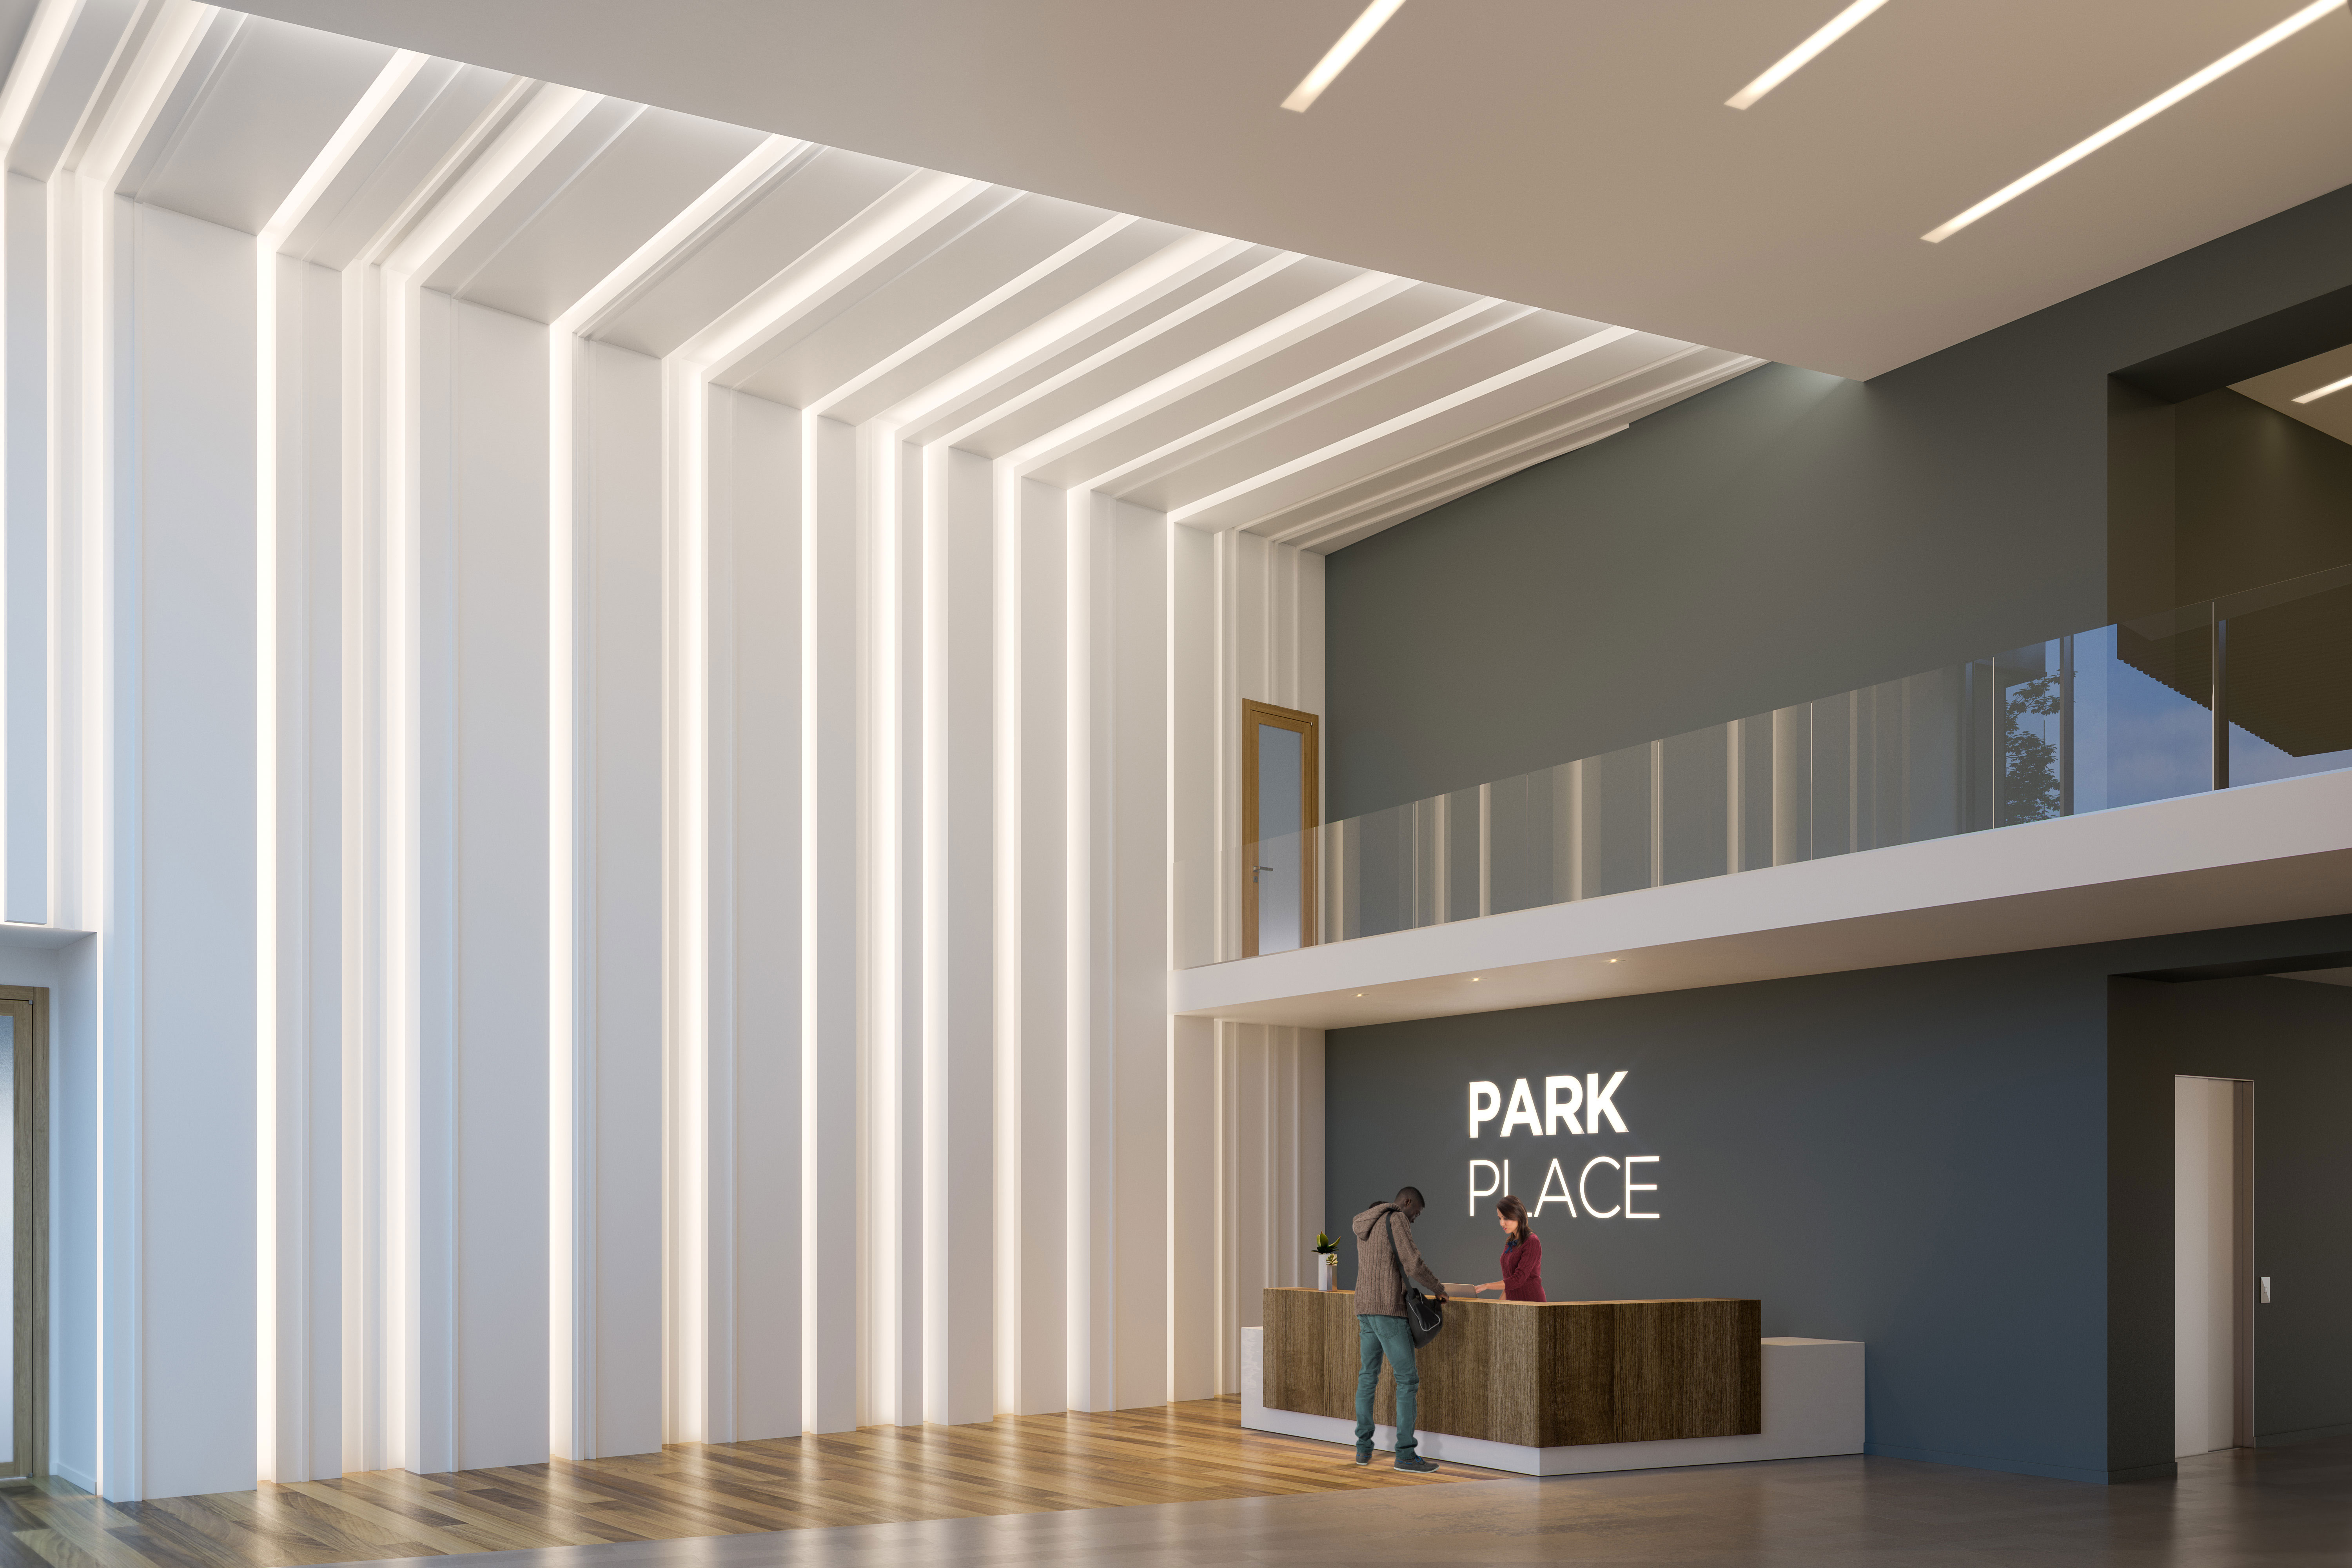 Park Place Lobby Rendering. CLICK for VR Experience